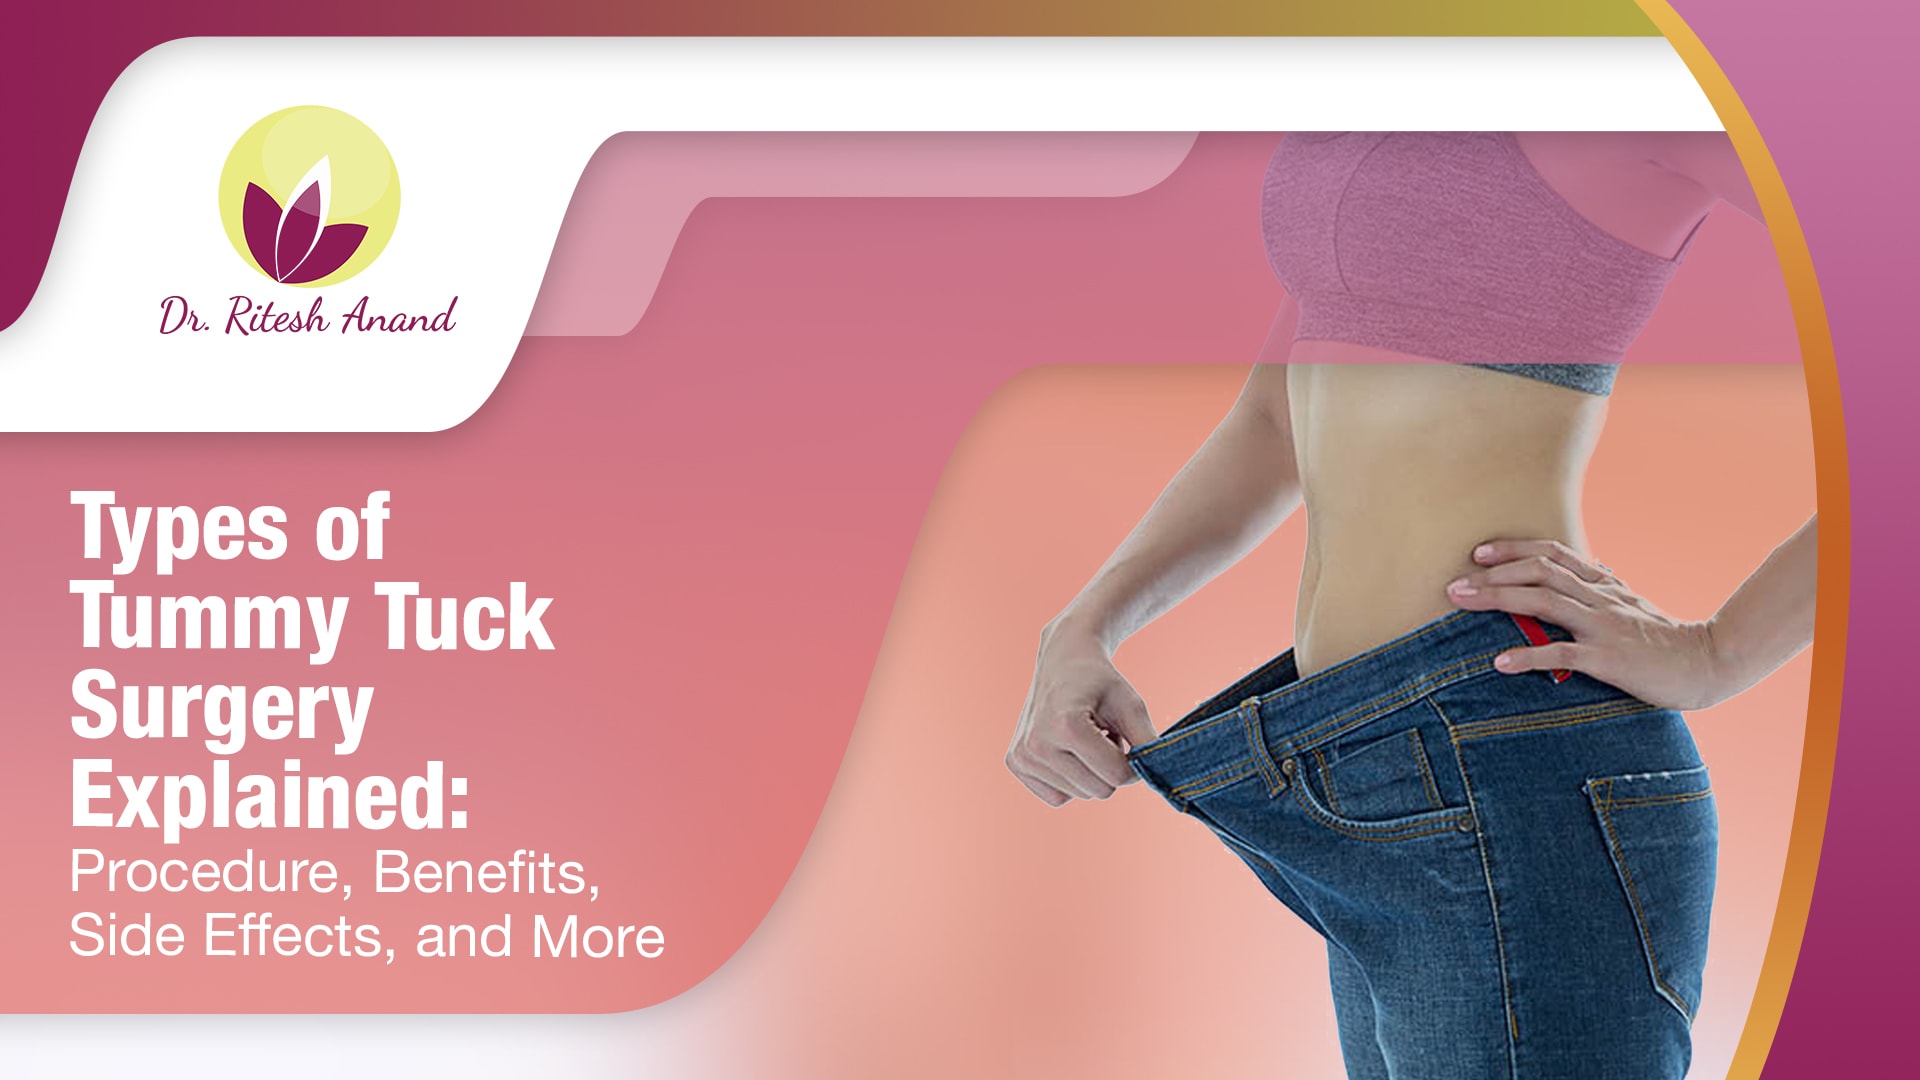 What is included in a tummy tuck?